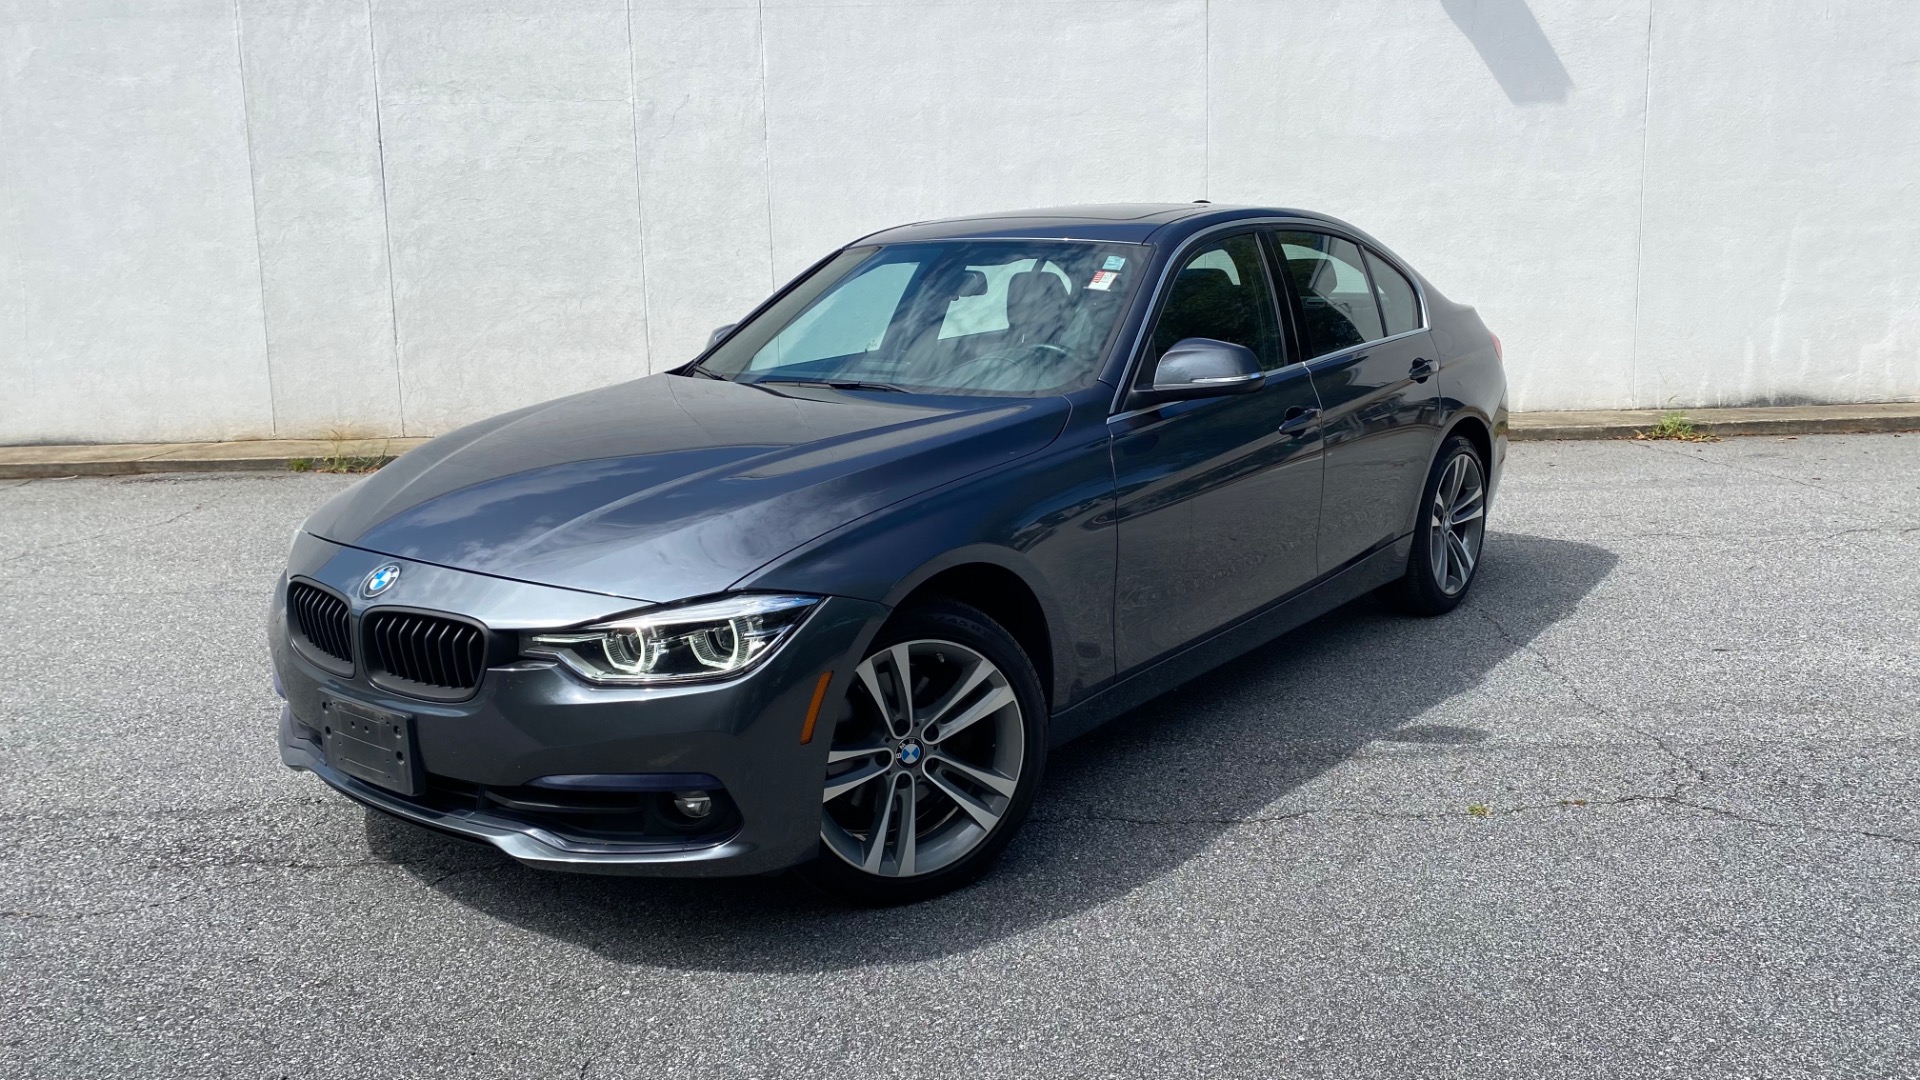 Used 2018 BMW 3 SERIES 330I XDRIVE / CONV PKG / SUNROOF / SPORT STS / HTD STS / REARVIE for sale Sold at Formula Imports in Charlotte NC 28227 2